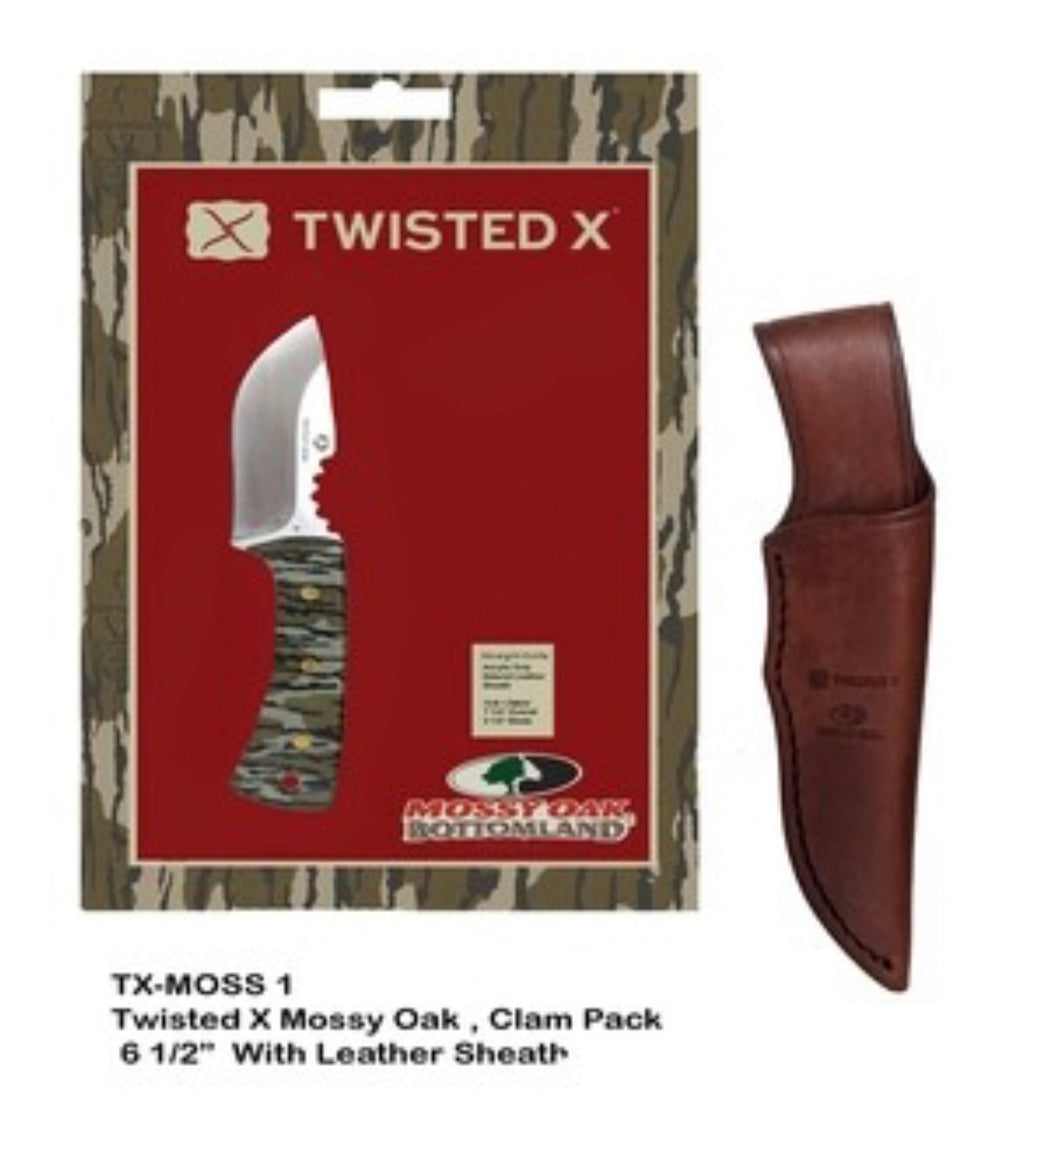 TWISTED X MOSSY OAK CLAM PACK FIXED BLADE WITH SHEATH TX-MOSS1